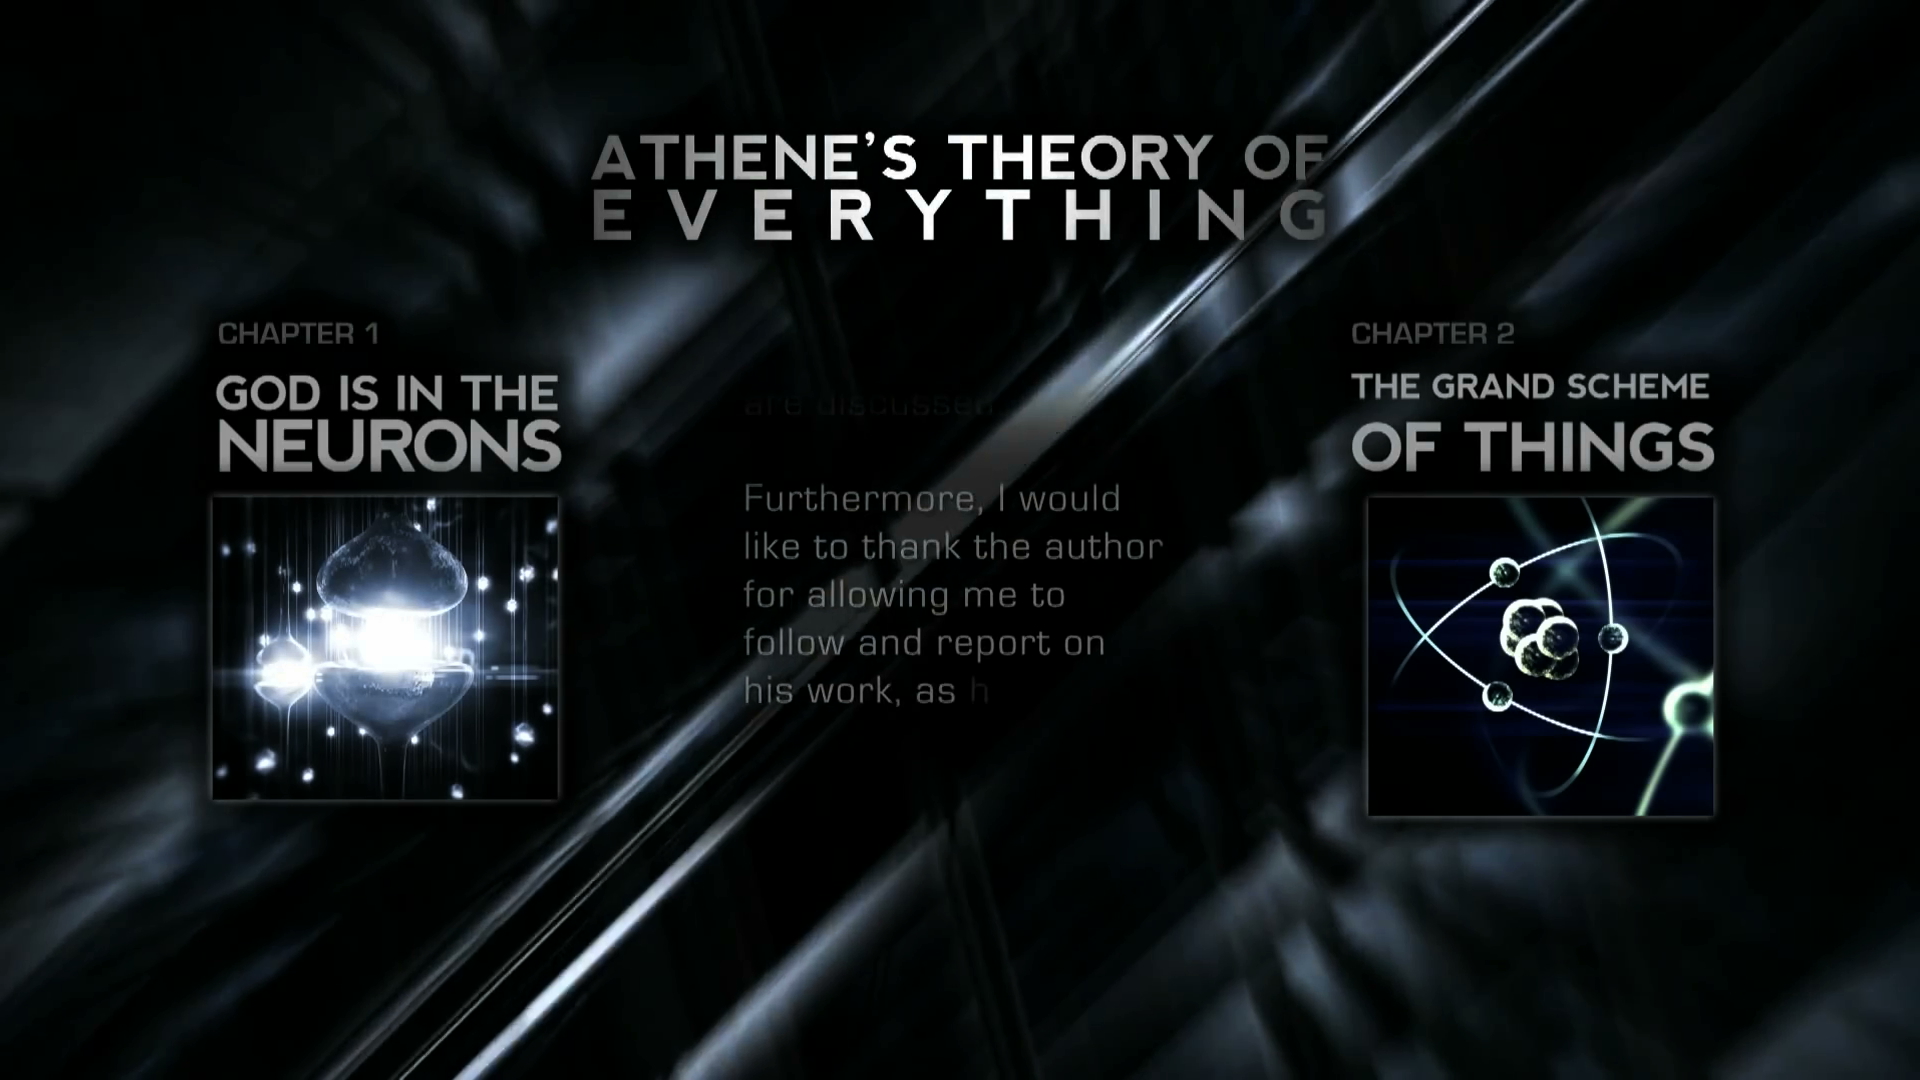 Theory of Everything by Athene